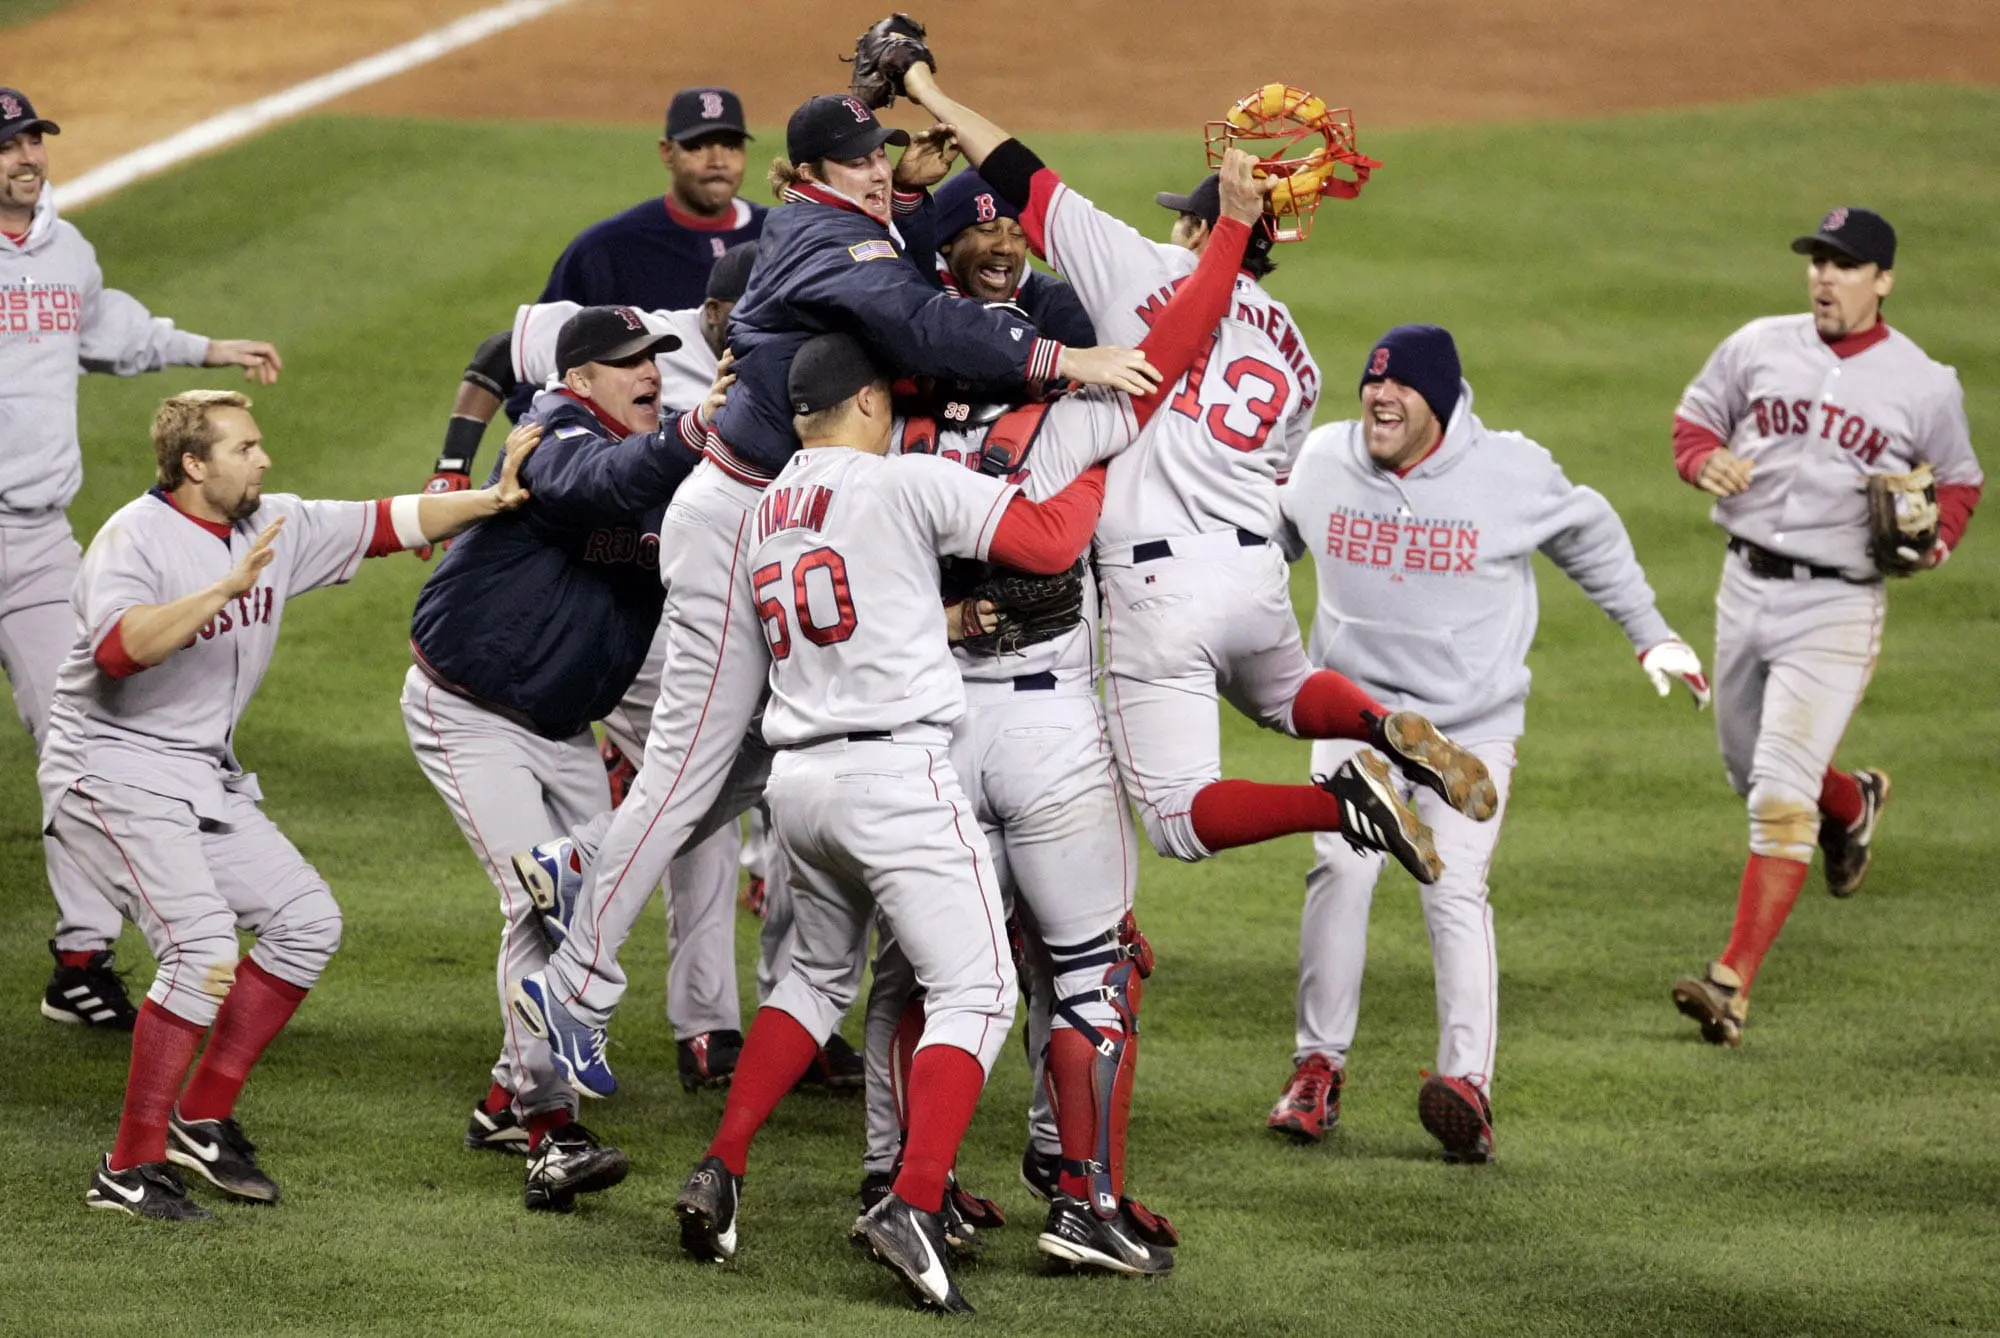 Red Sox players storm the field at Yankee Stadium after defeating New York to win the 2004 American League championship.